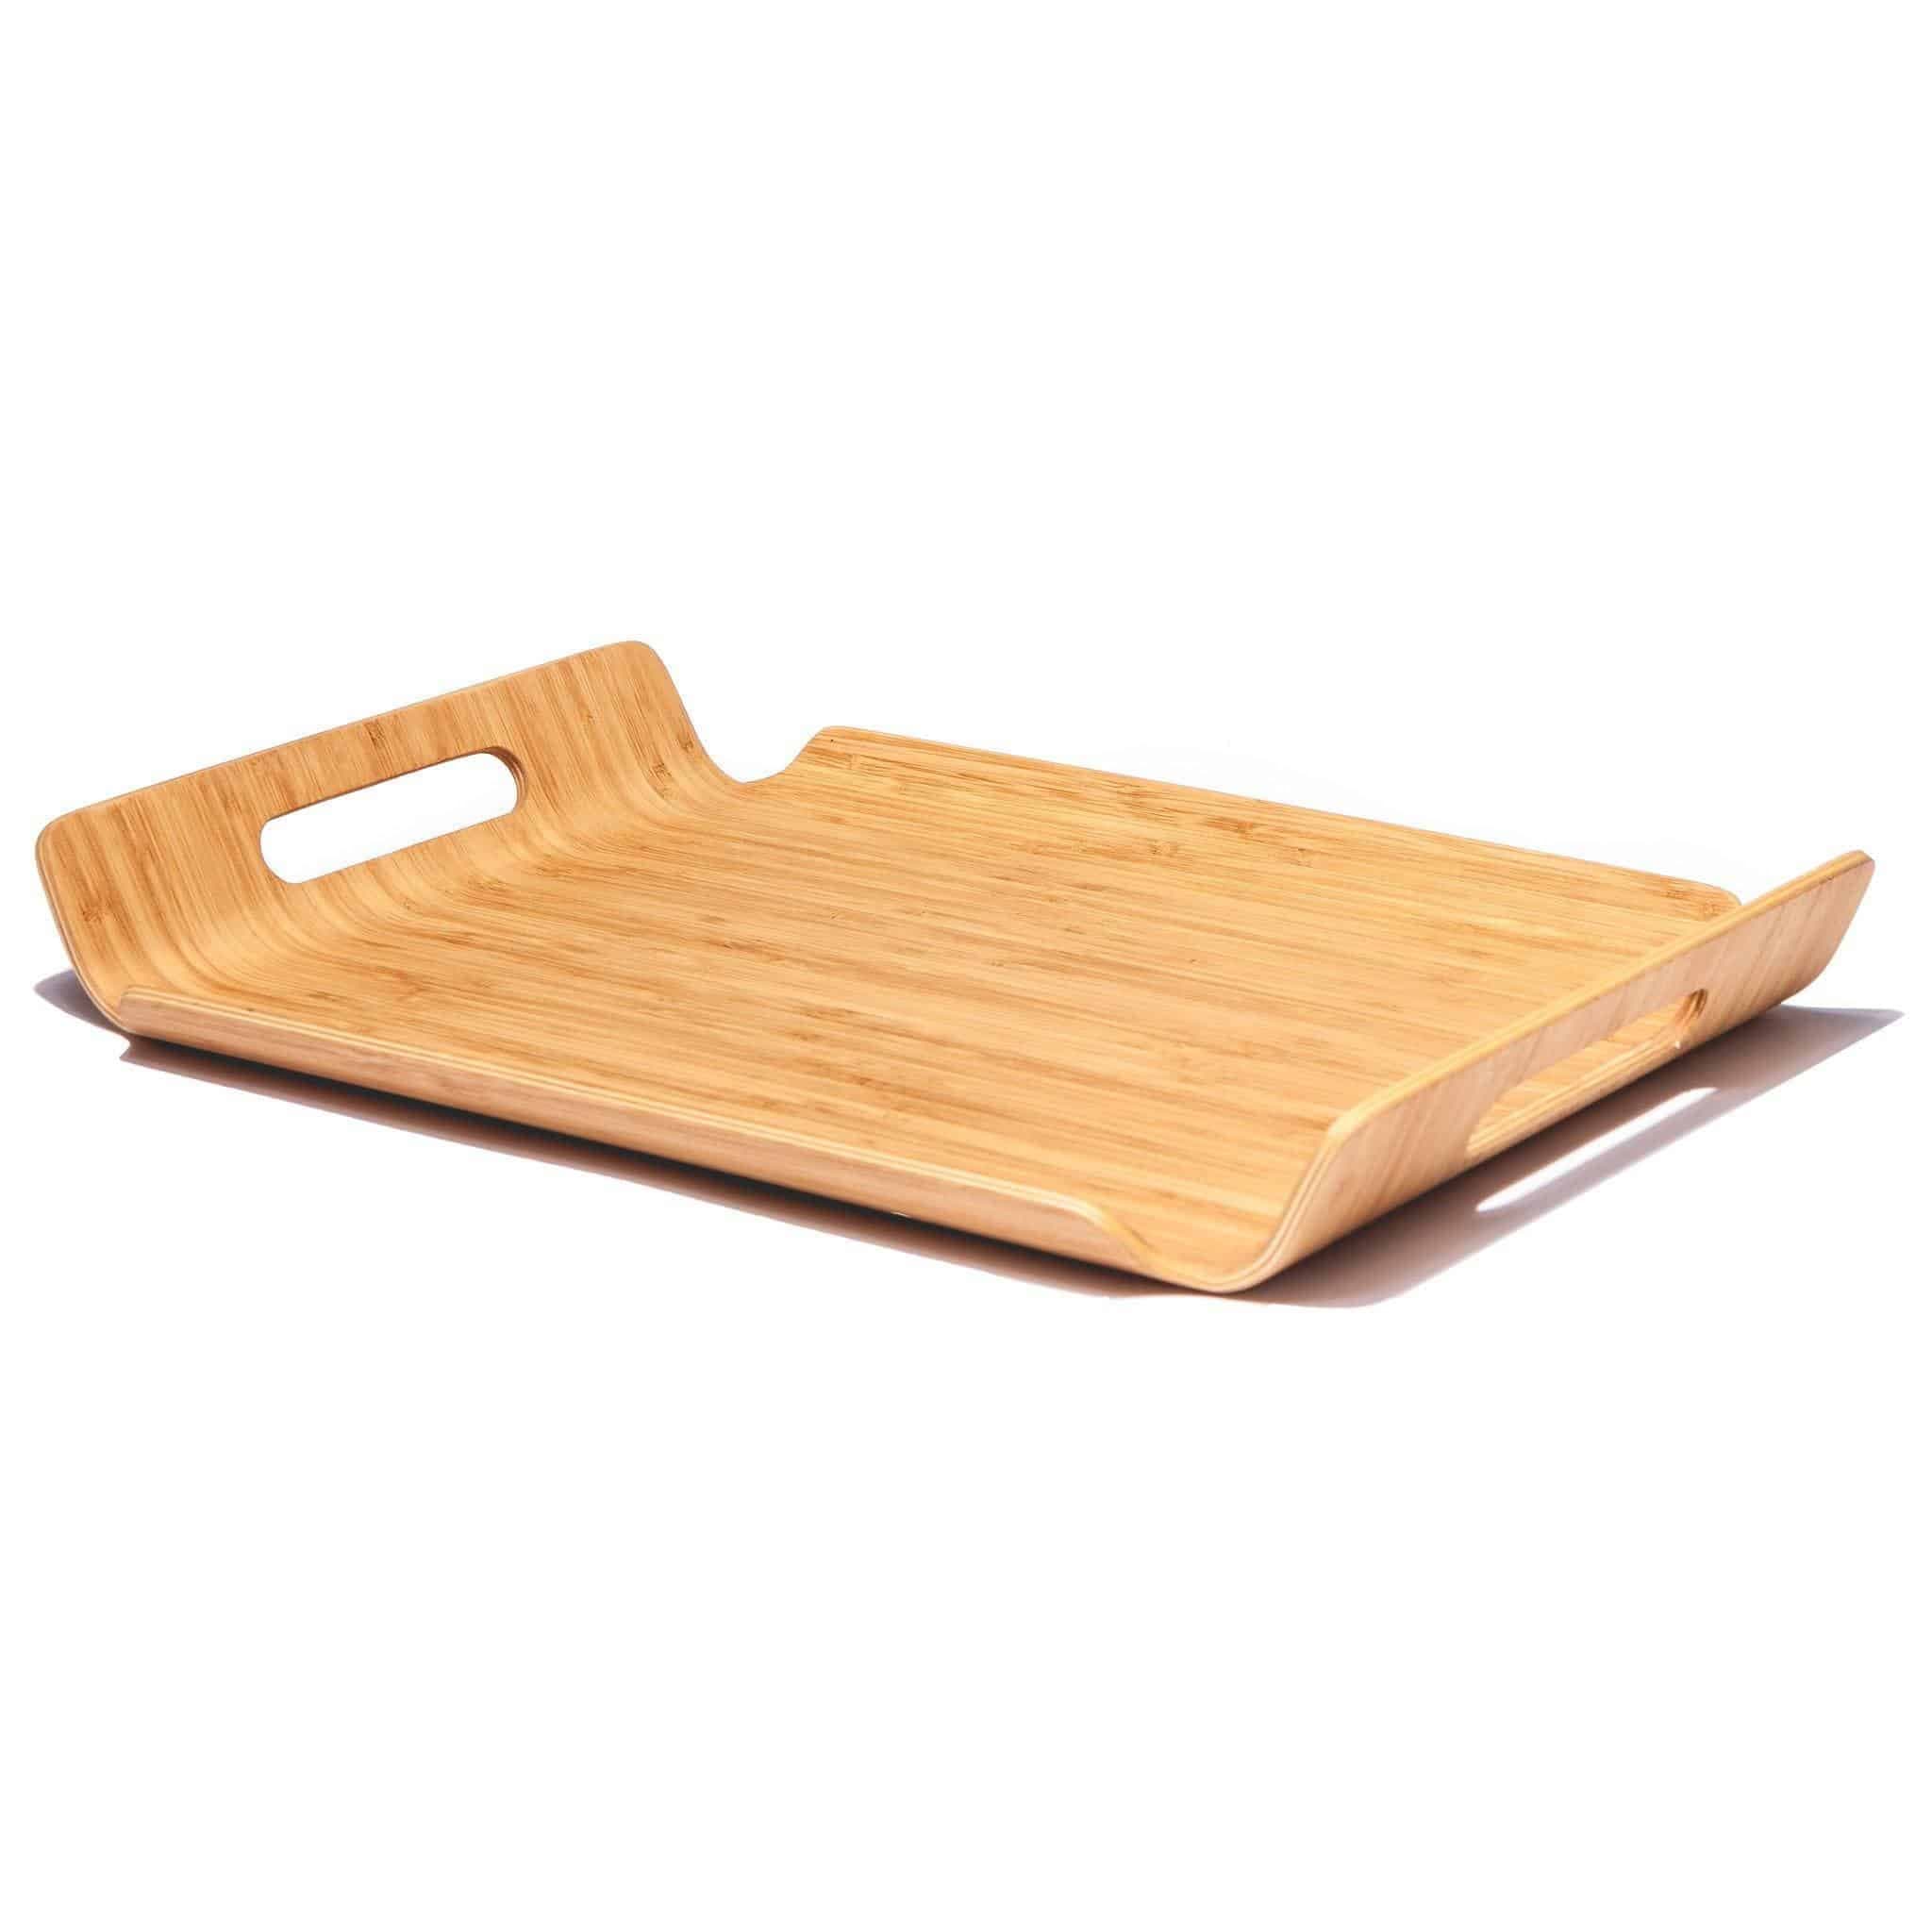 Bamboo chopping board with plastic tray